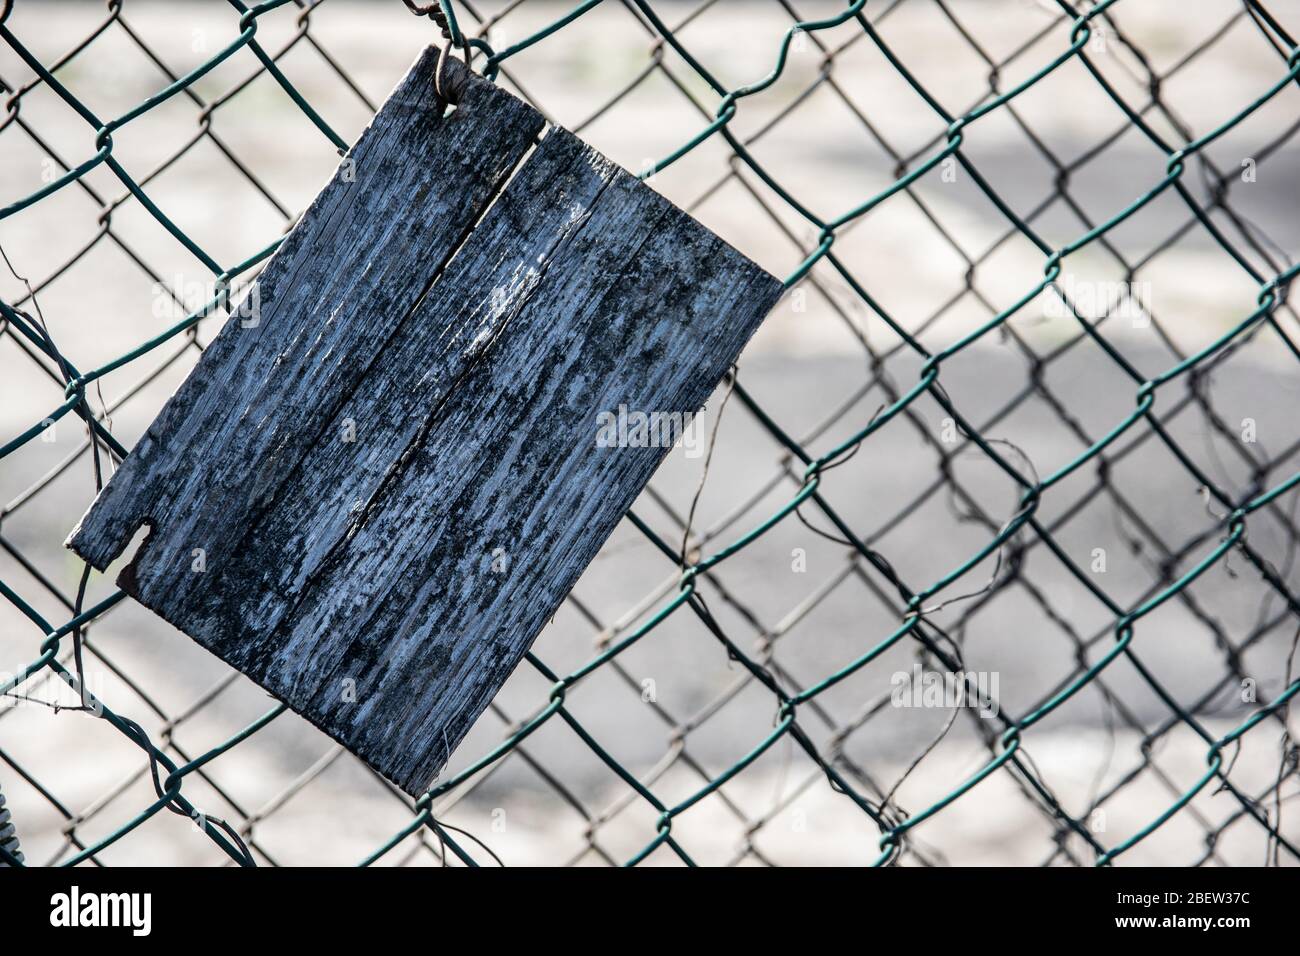 Old cracked rectangular wooden plate on an old green mesh fence Stock Photo